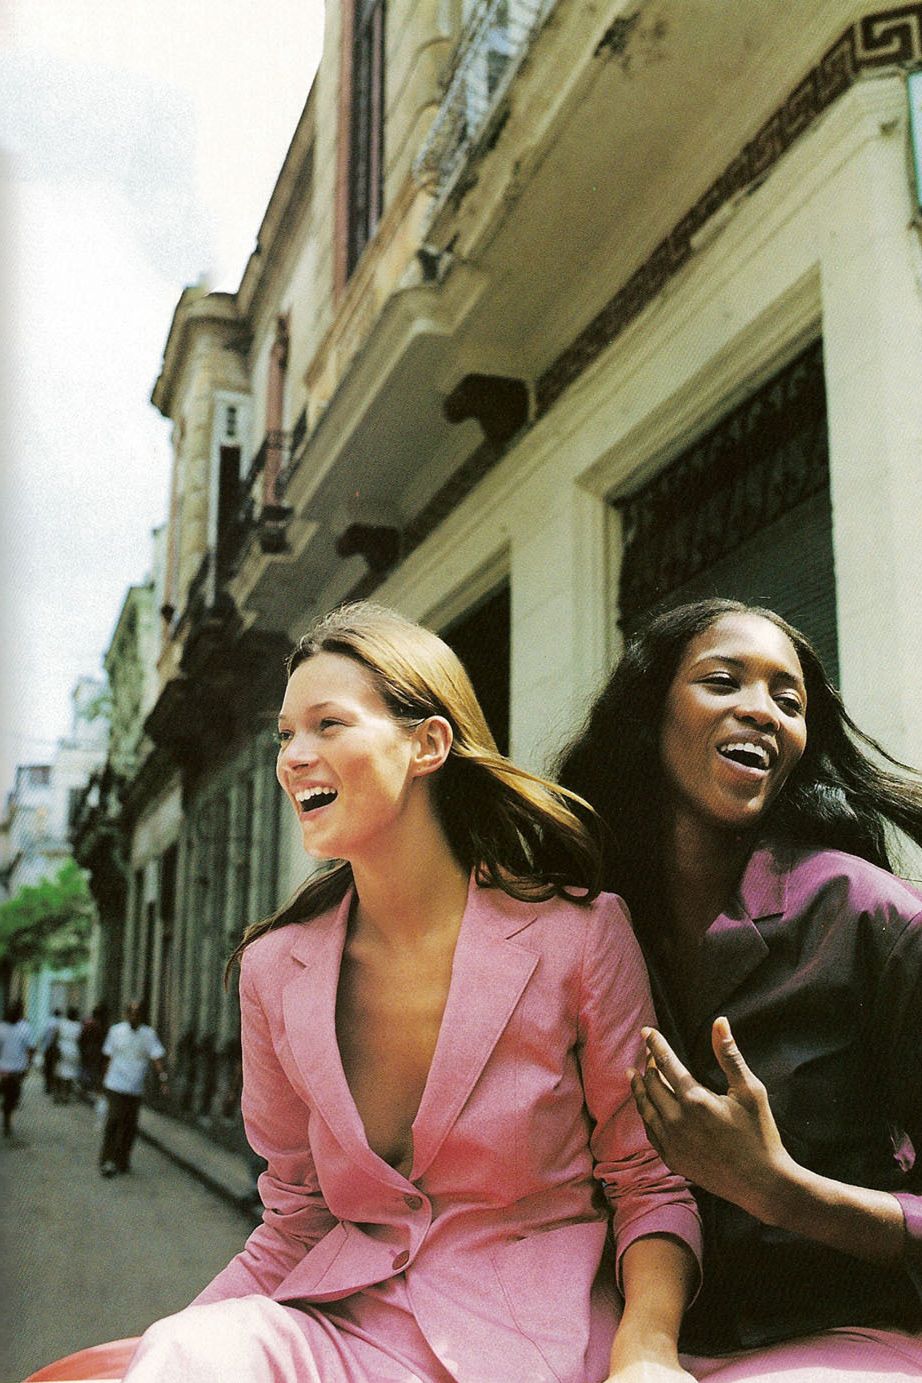 <p>Kate Moss and Naomi Campbell wore the hue head-to-toe when they were shot by&nbsp;Patrick Demarchelier<span class="redactor-invisible-space"> for the May 1998 issue of Harper's BAZAAR in Cuba.&nbsp;</span></p><p><span class="redactor-invisible-space"></span></p>